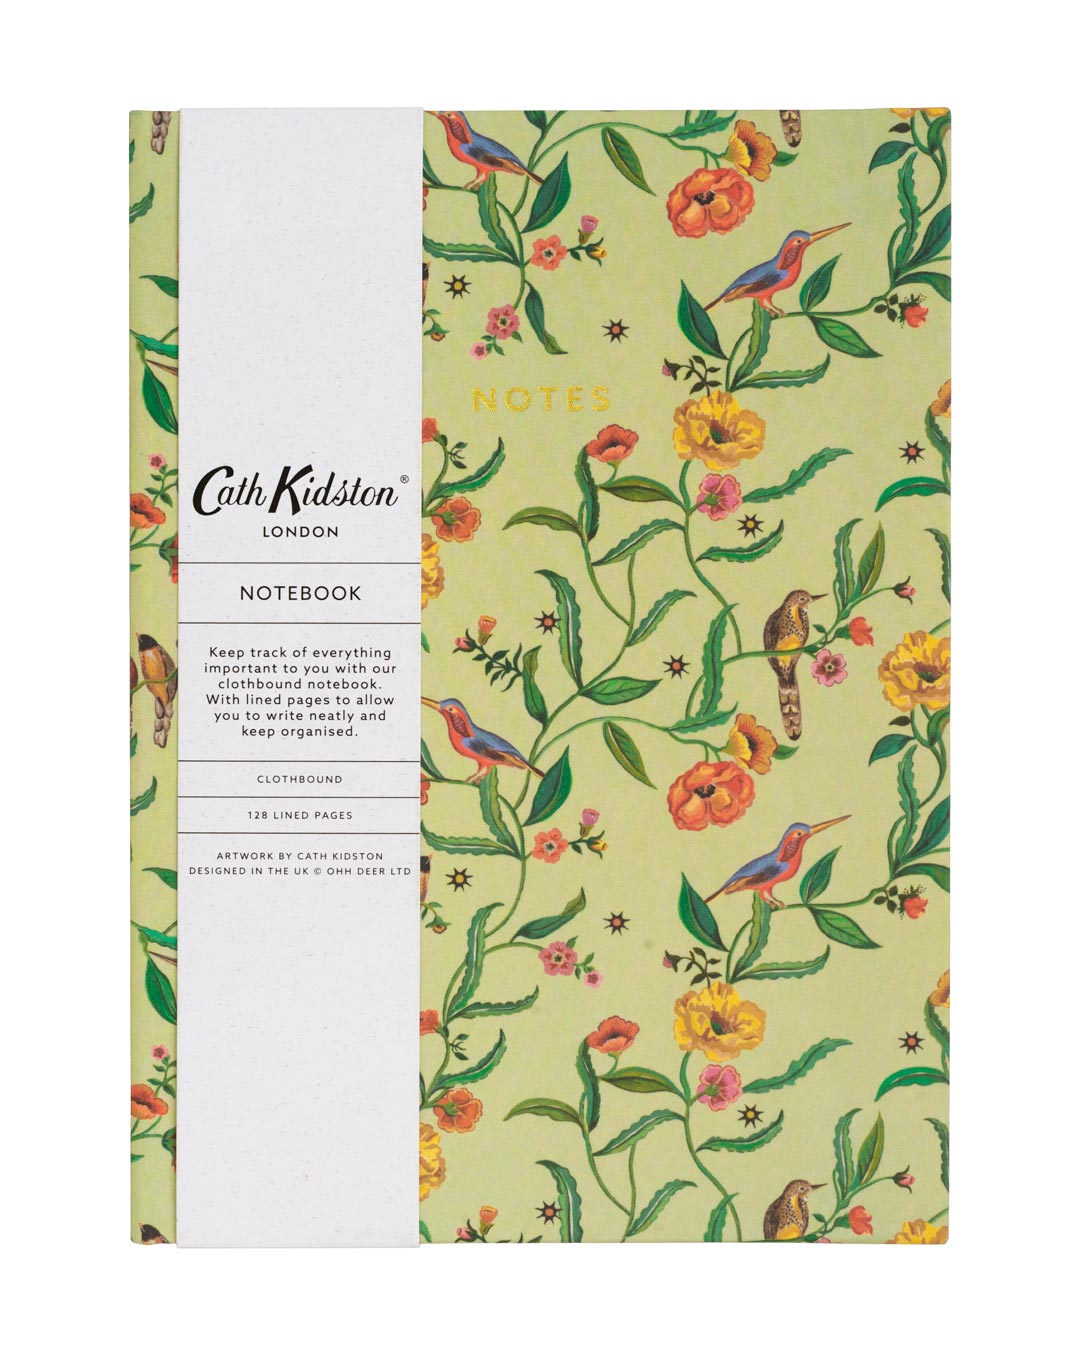 Cath Kidston Notebook | Premium Illustrated A5 Notebook | 196 Lined Pages | Summer Birds | Gift for Stationery Lovers